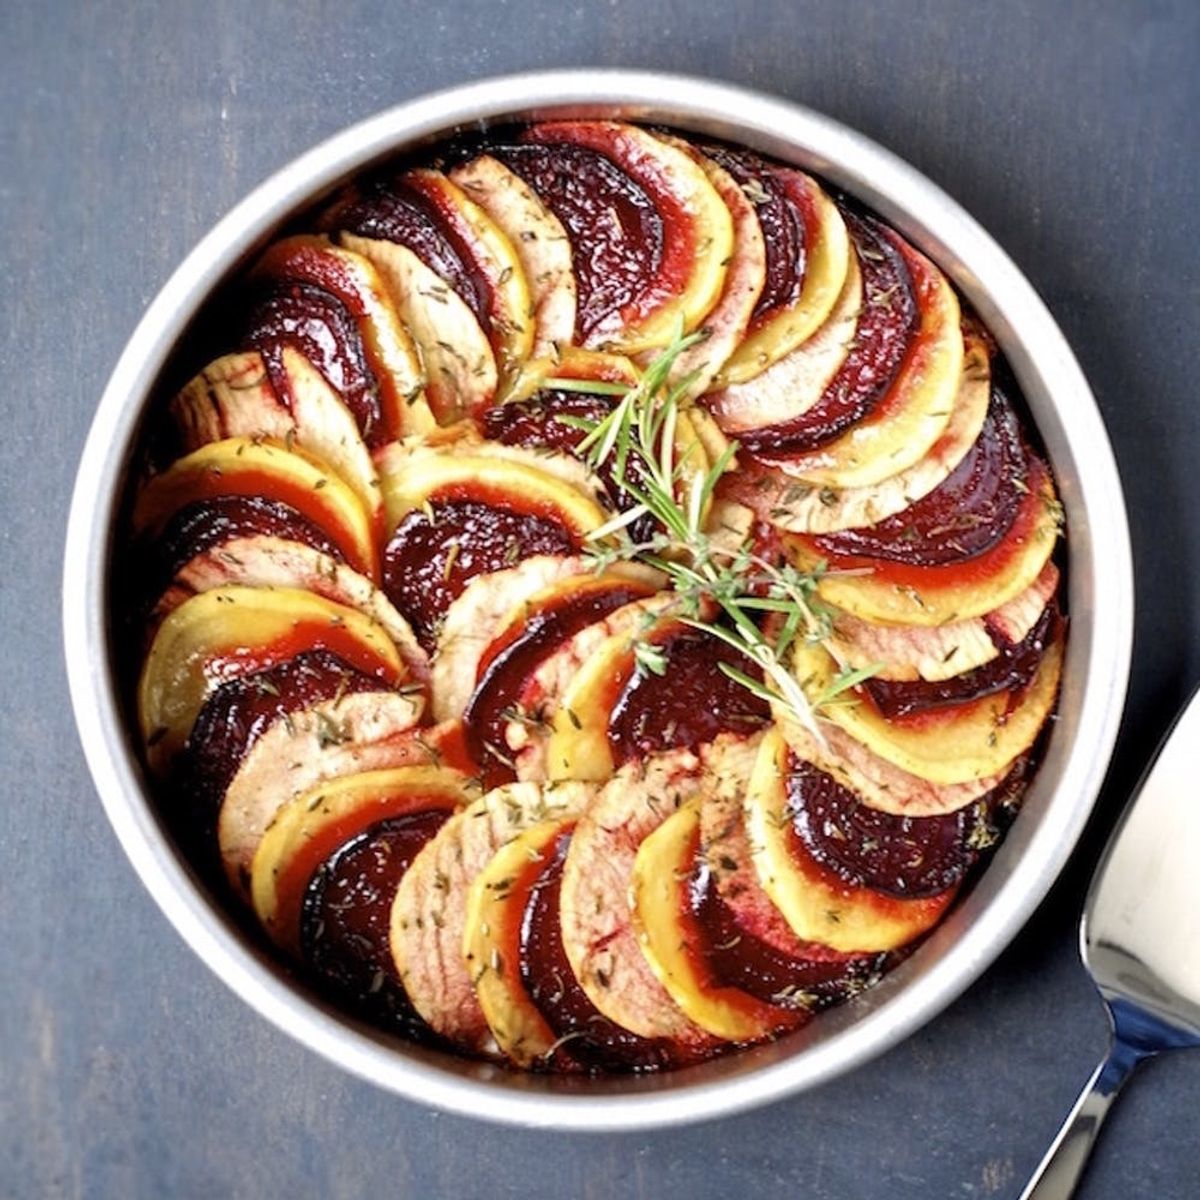 14 Savory Apple Recipes to Make Your Mouth Water